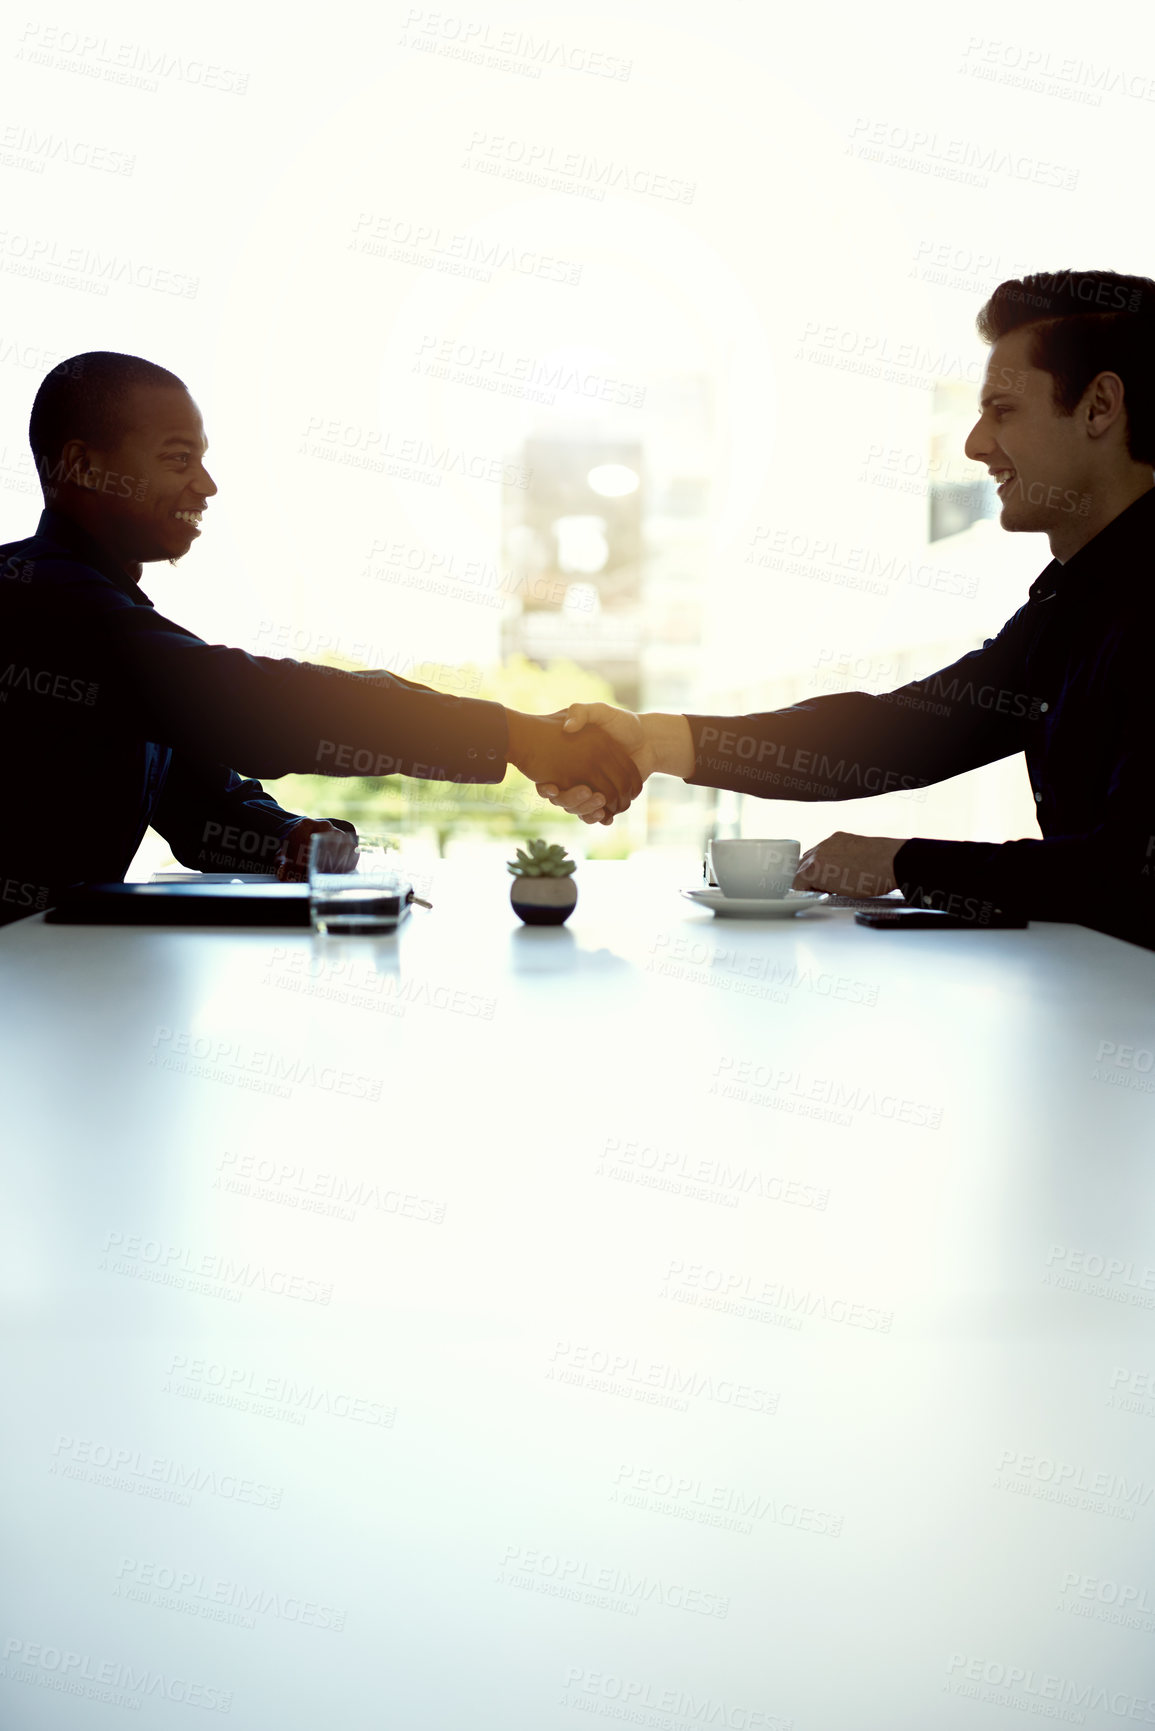 Buy stock photo Cropped shot of two businesspeople shaking hands in an office